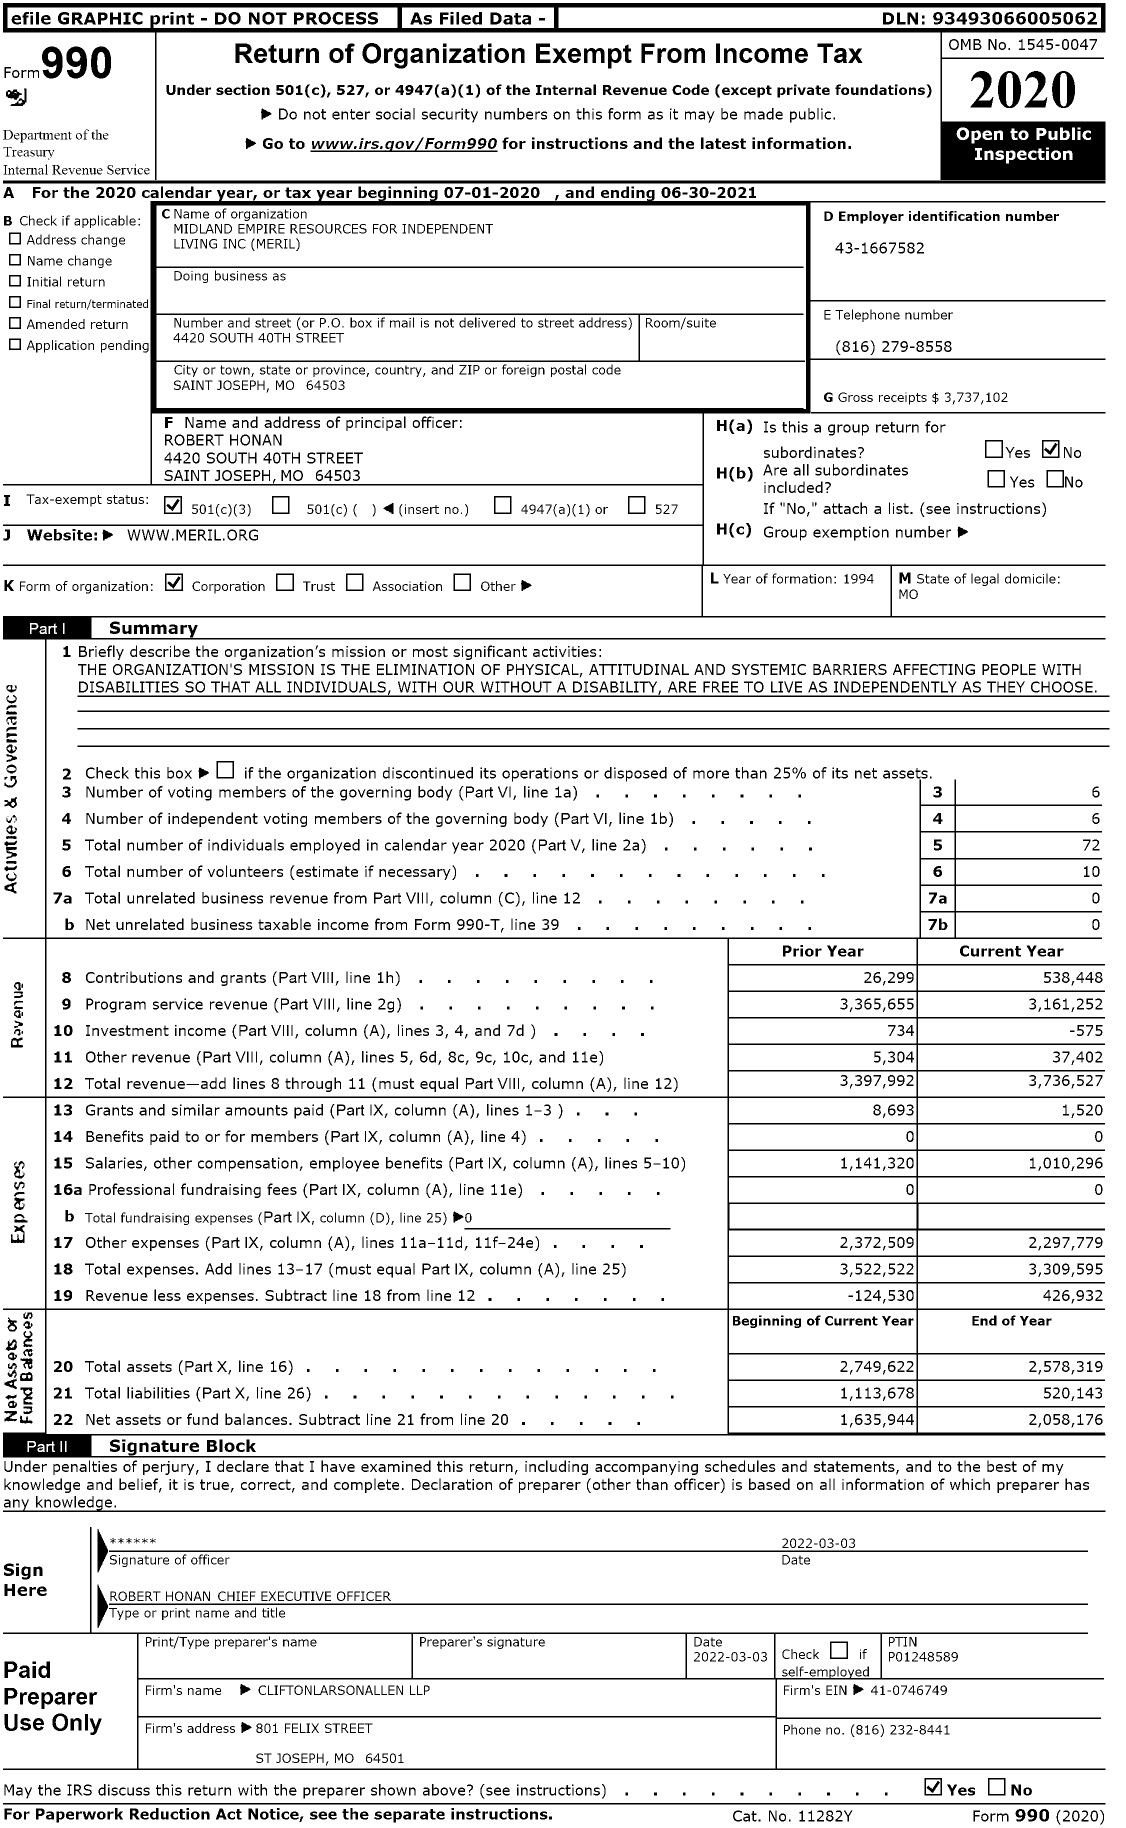 Image of first page of 2020 Form 990 for Midland Empire Resources for Independent Living (MERIL)